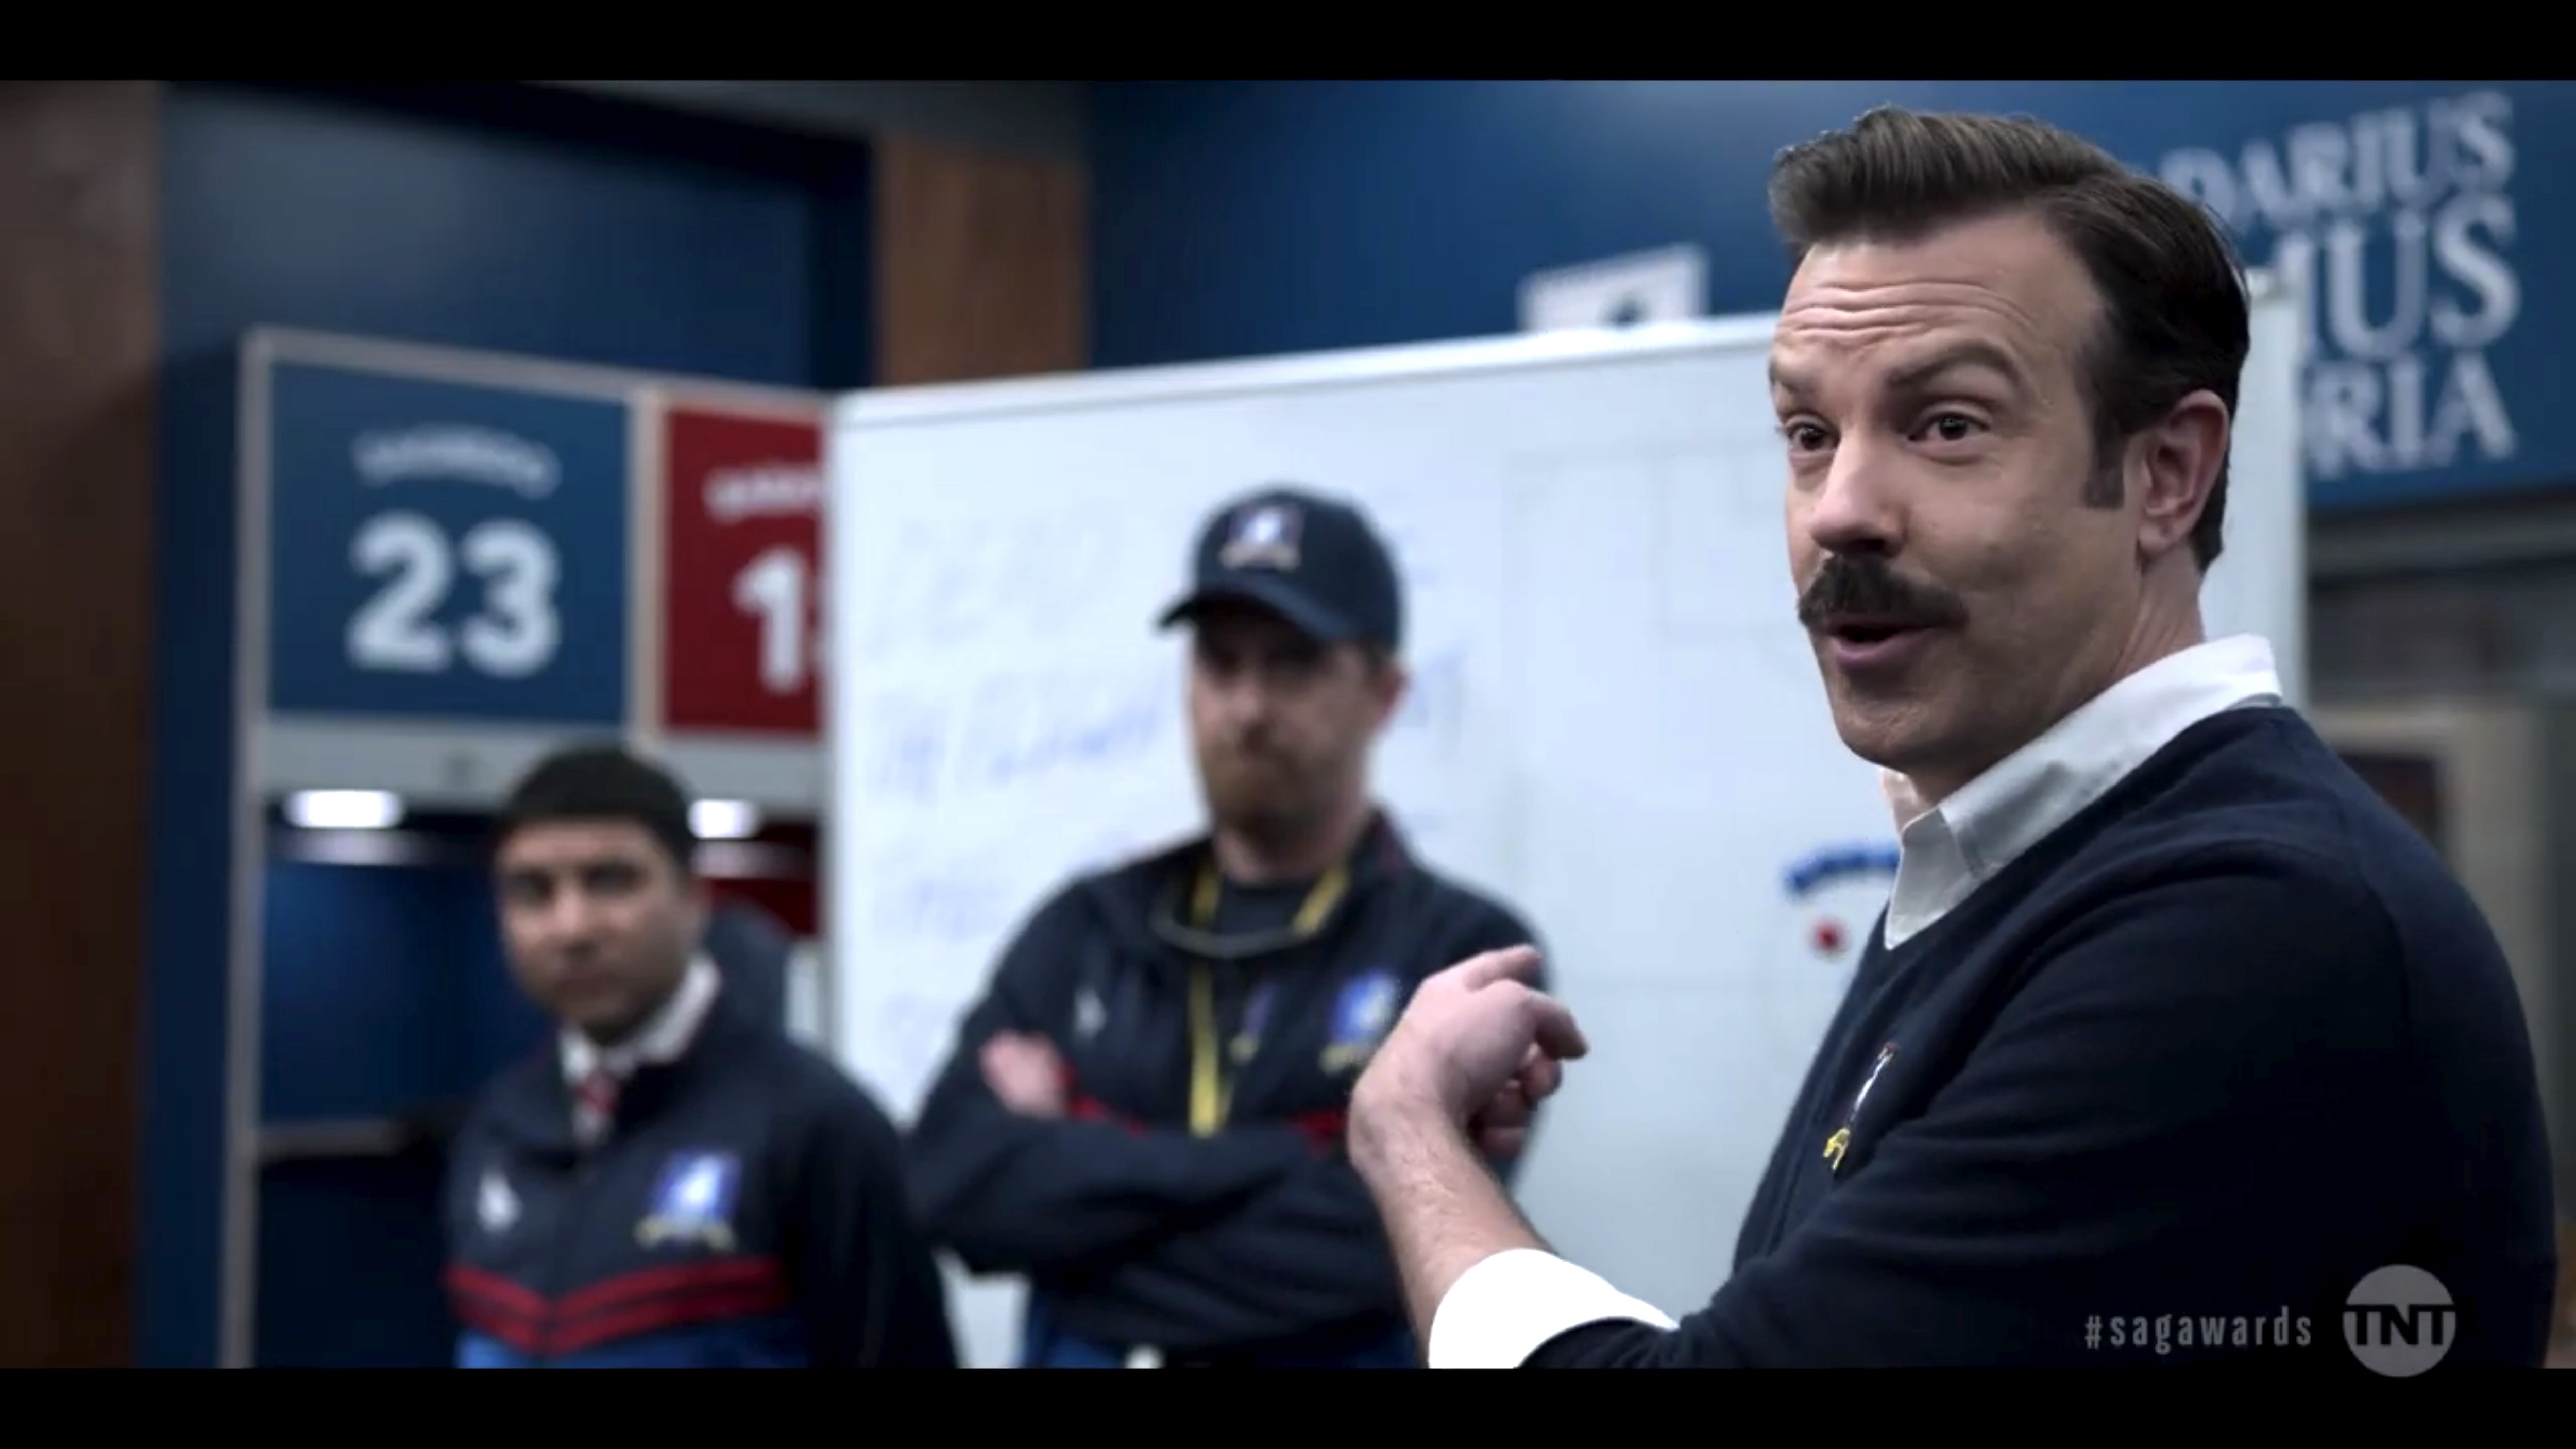 Jason Sudeikis as Ted Lasso character, Brendan Hunt as Coach Beard, and Nick Mohammed as Nathan Shelley